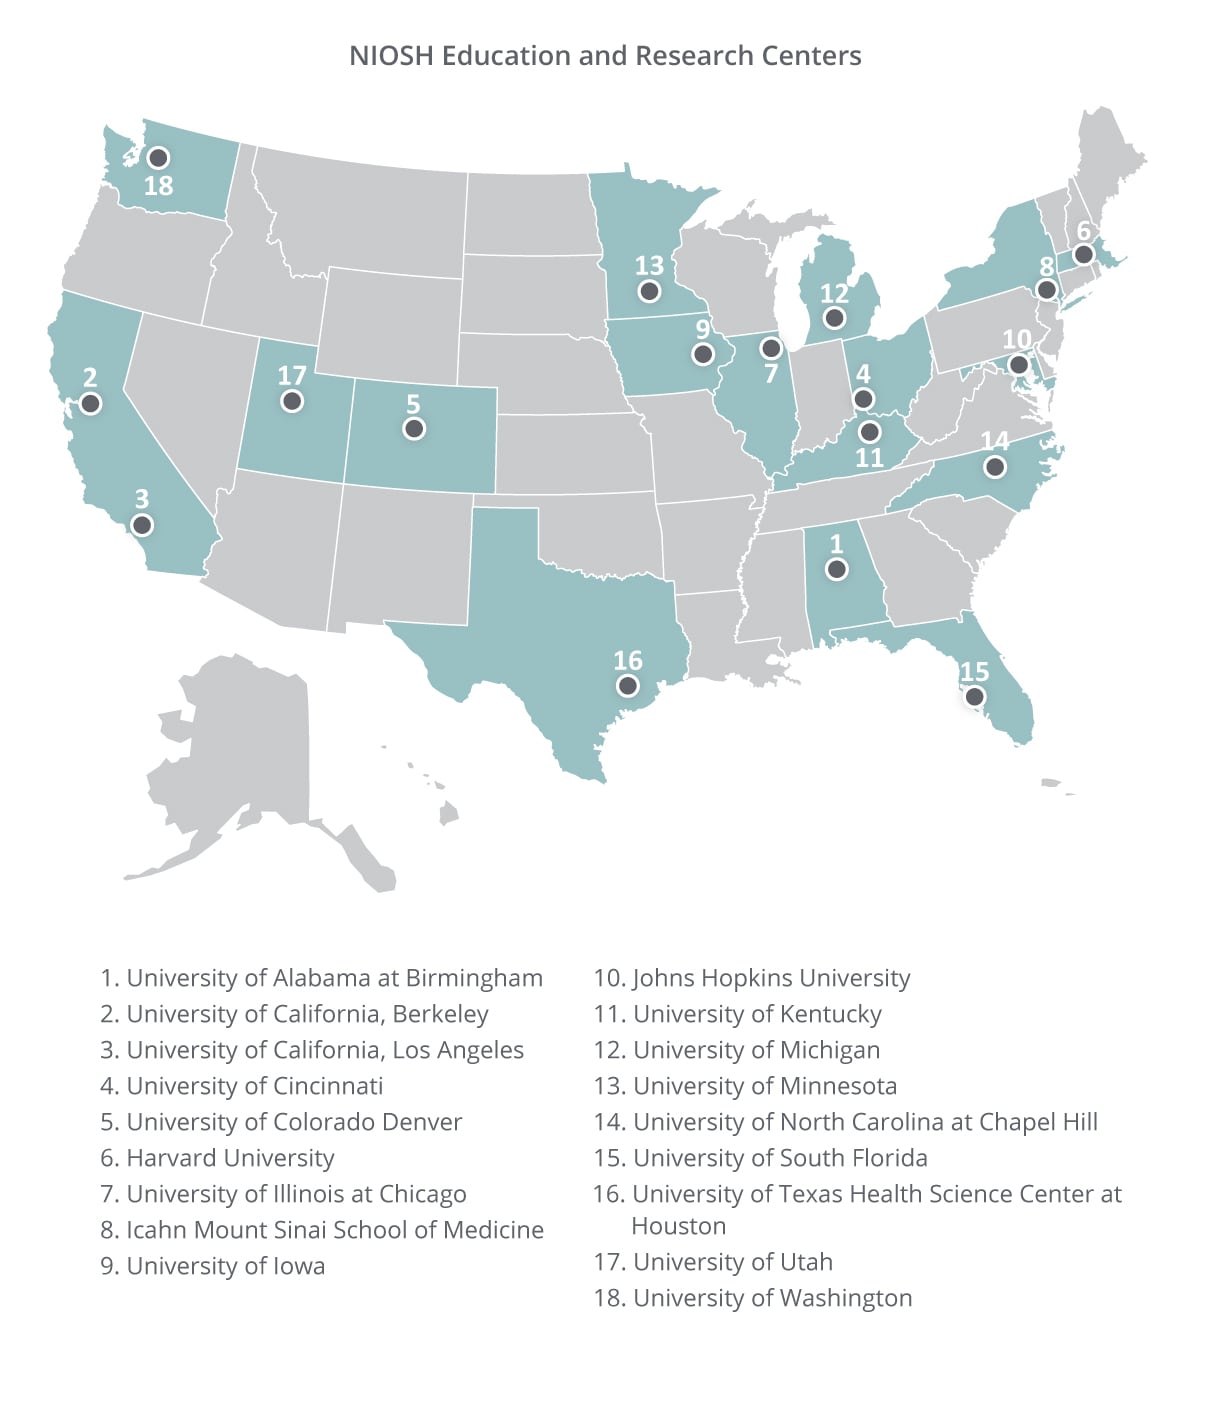 USA Map of Education and Research Centers